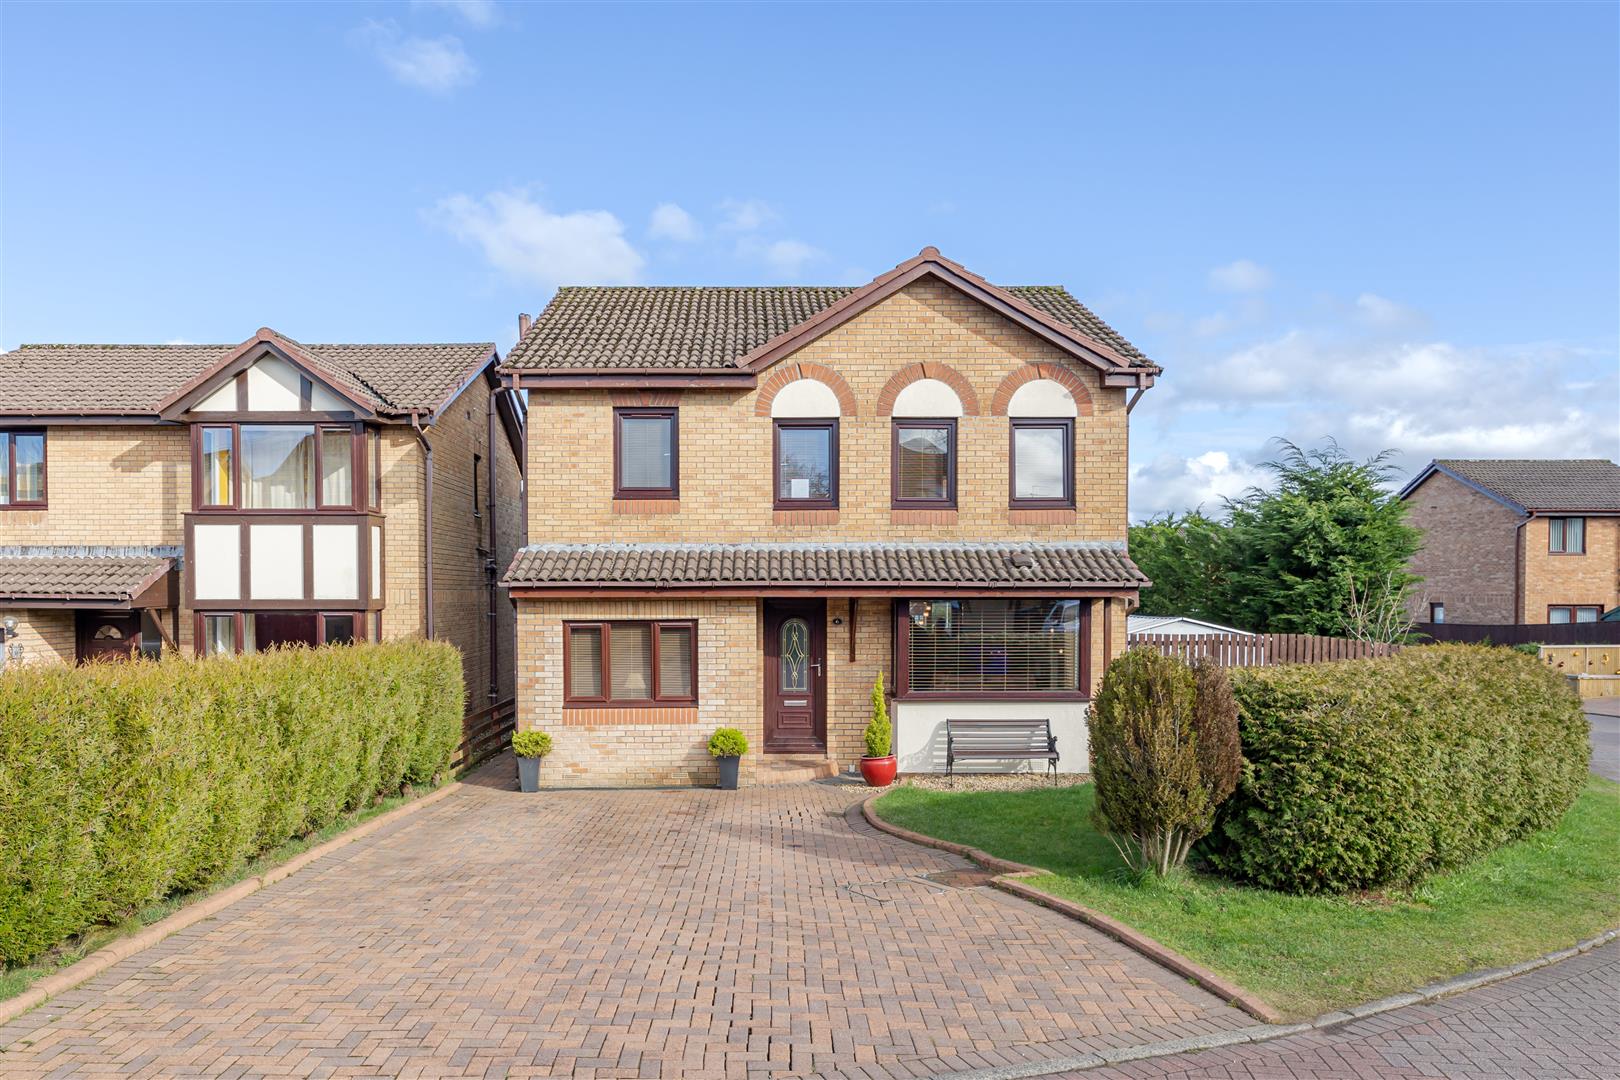 5 bed detached house for sale in Blantyre Gardens, Glasgow, G68 